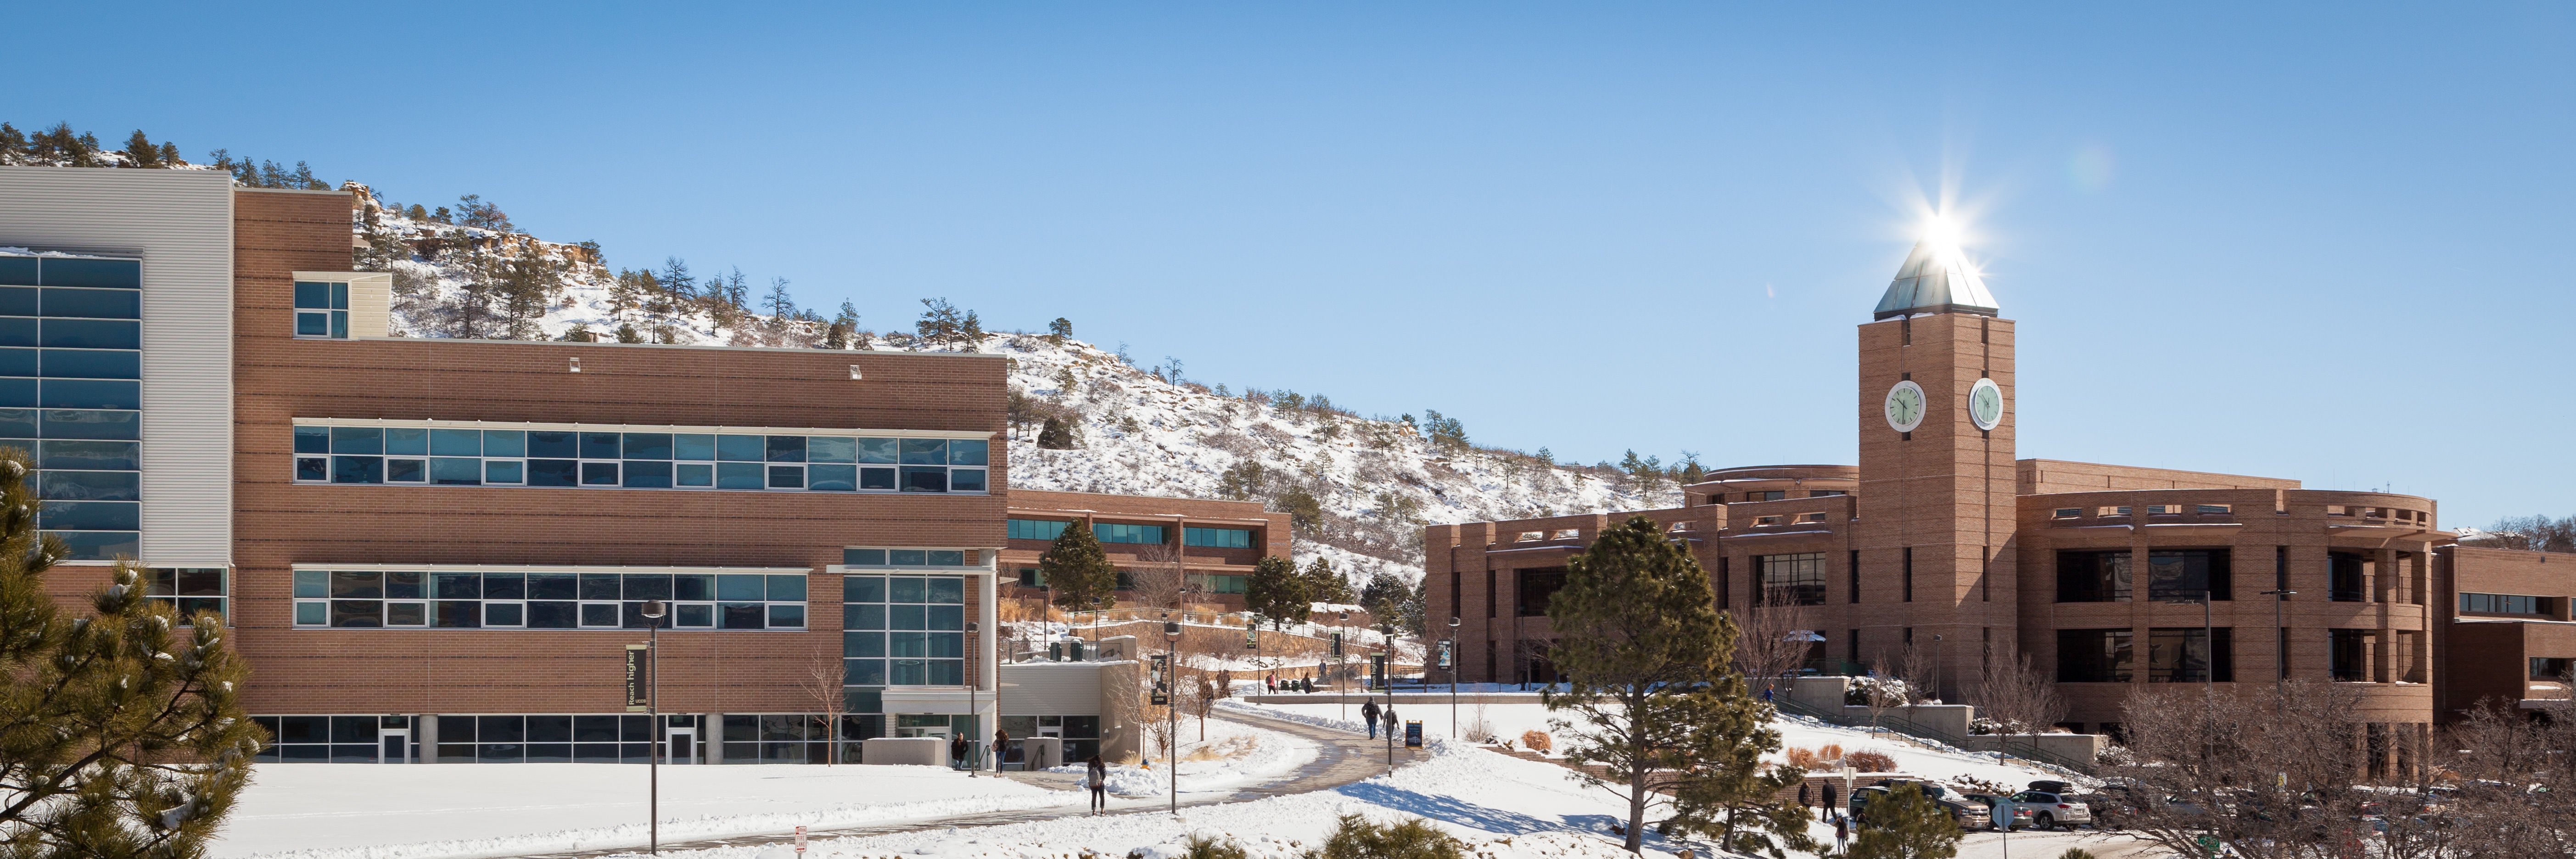 UCCS Campus on winter